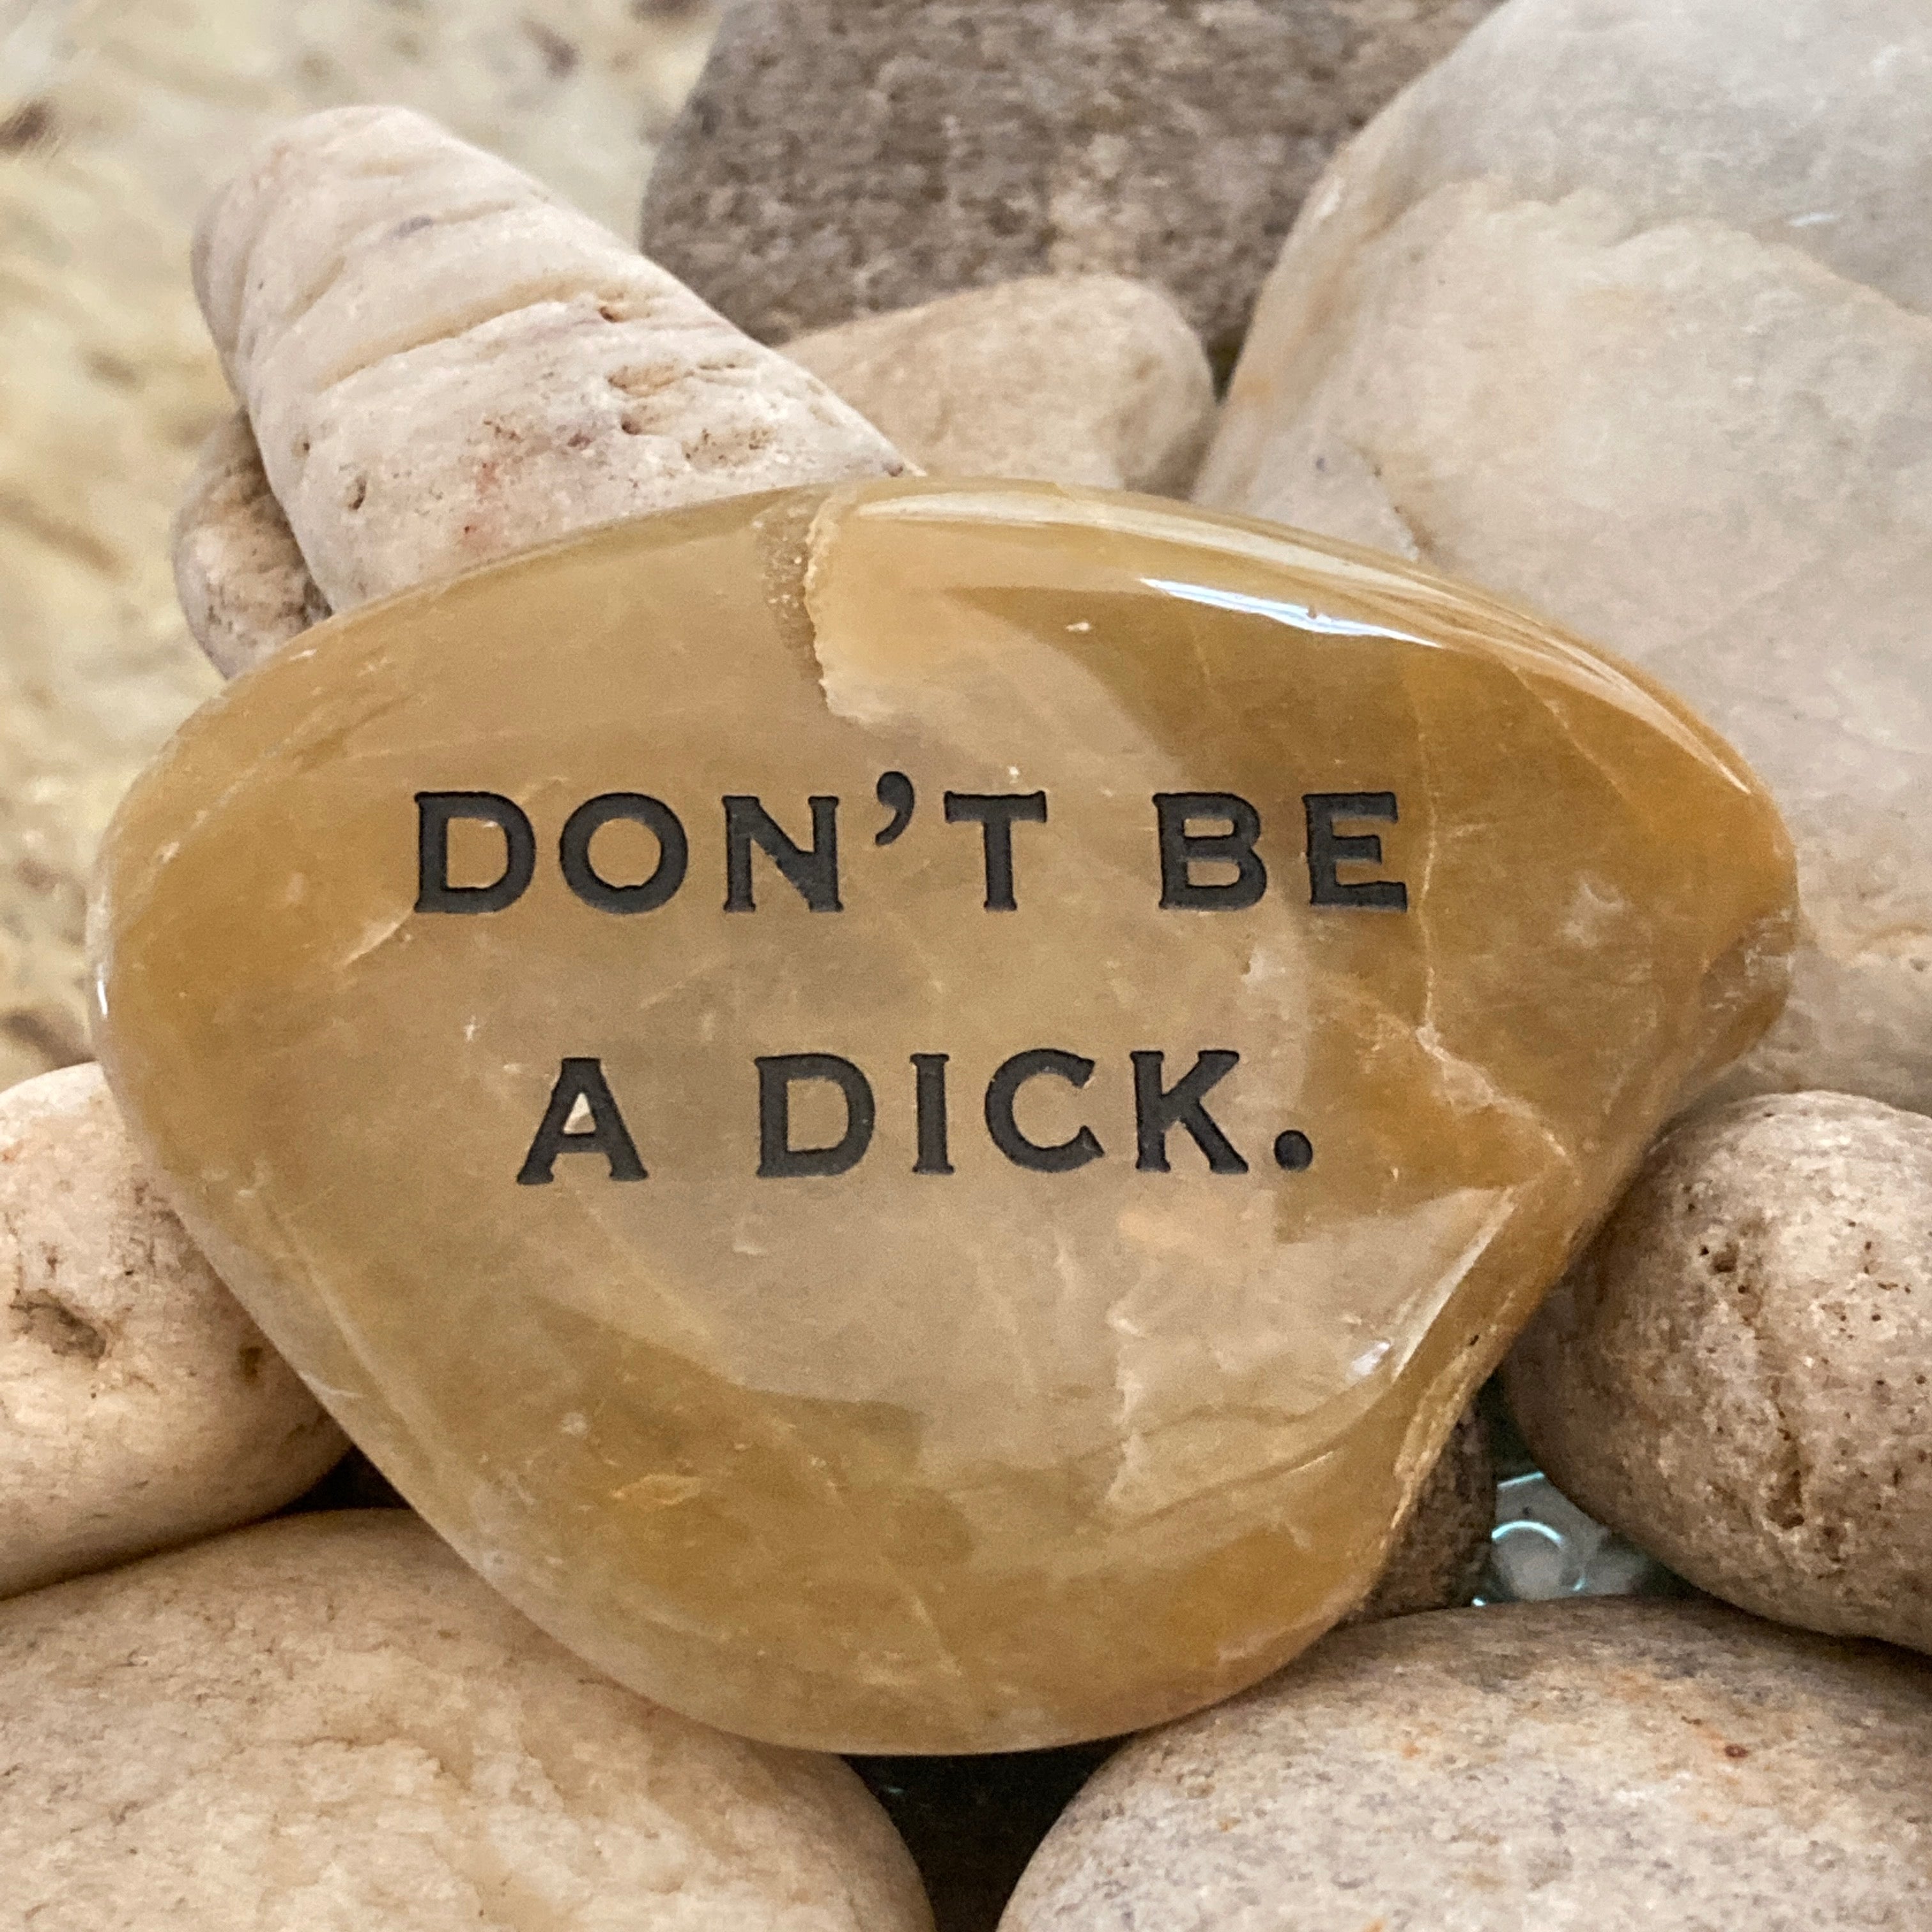 Don't Be A Dick ~ Engraved Rock